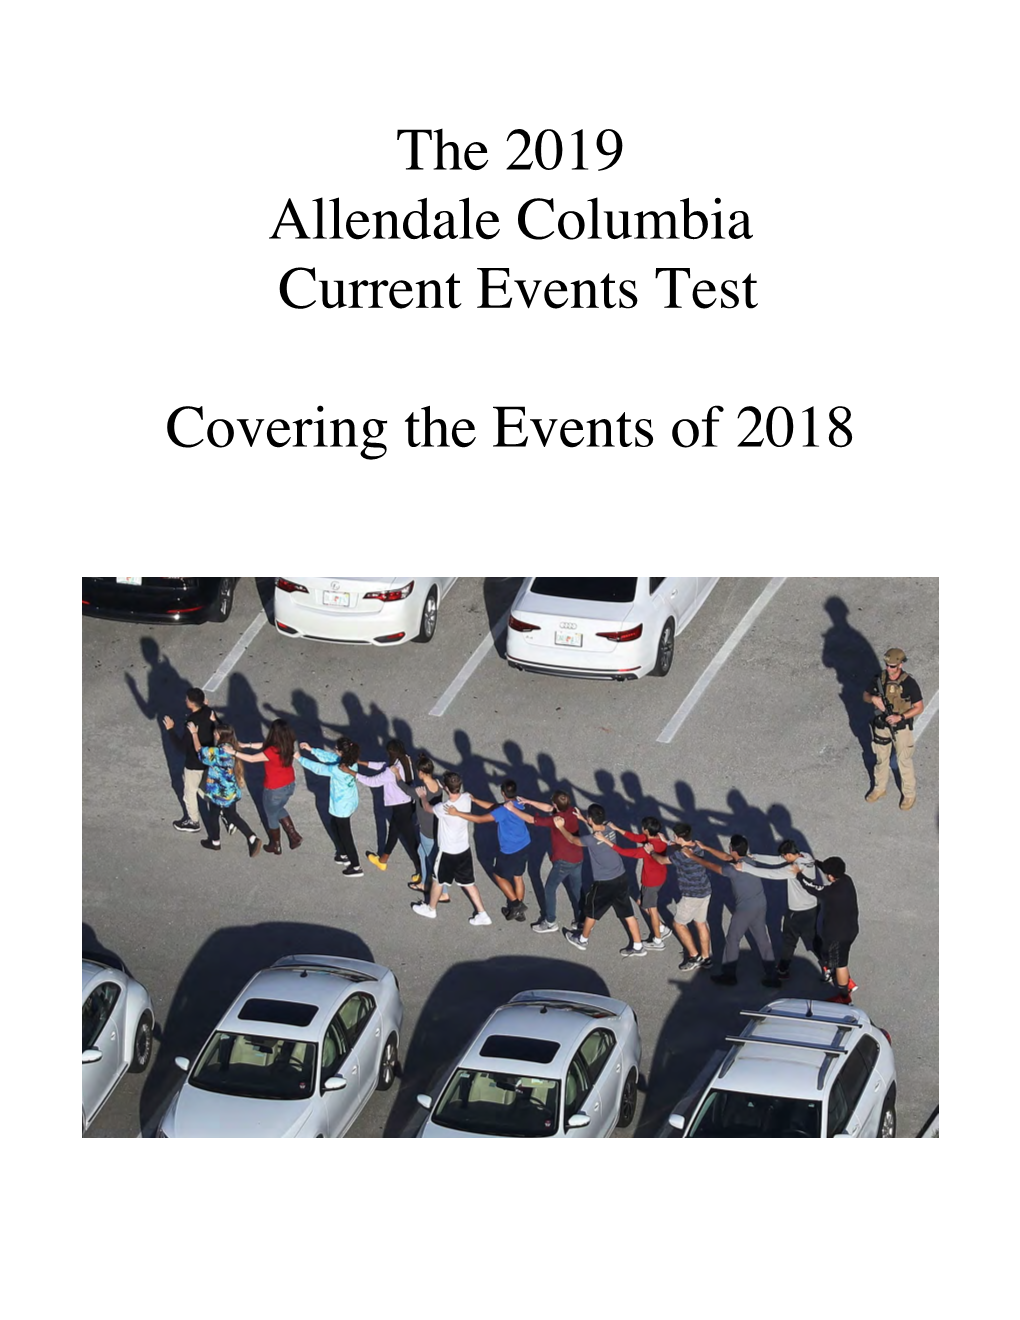 Allendale Columbia 2019 Current Events Test